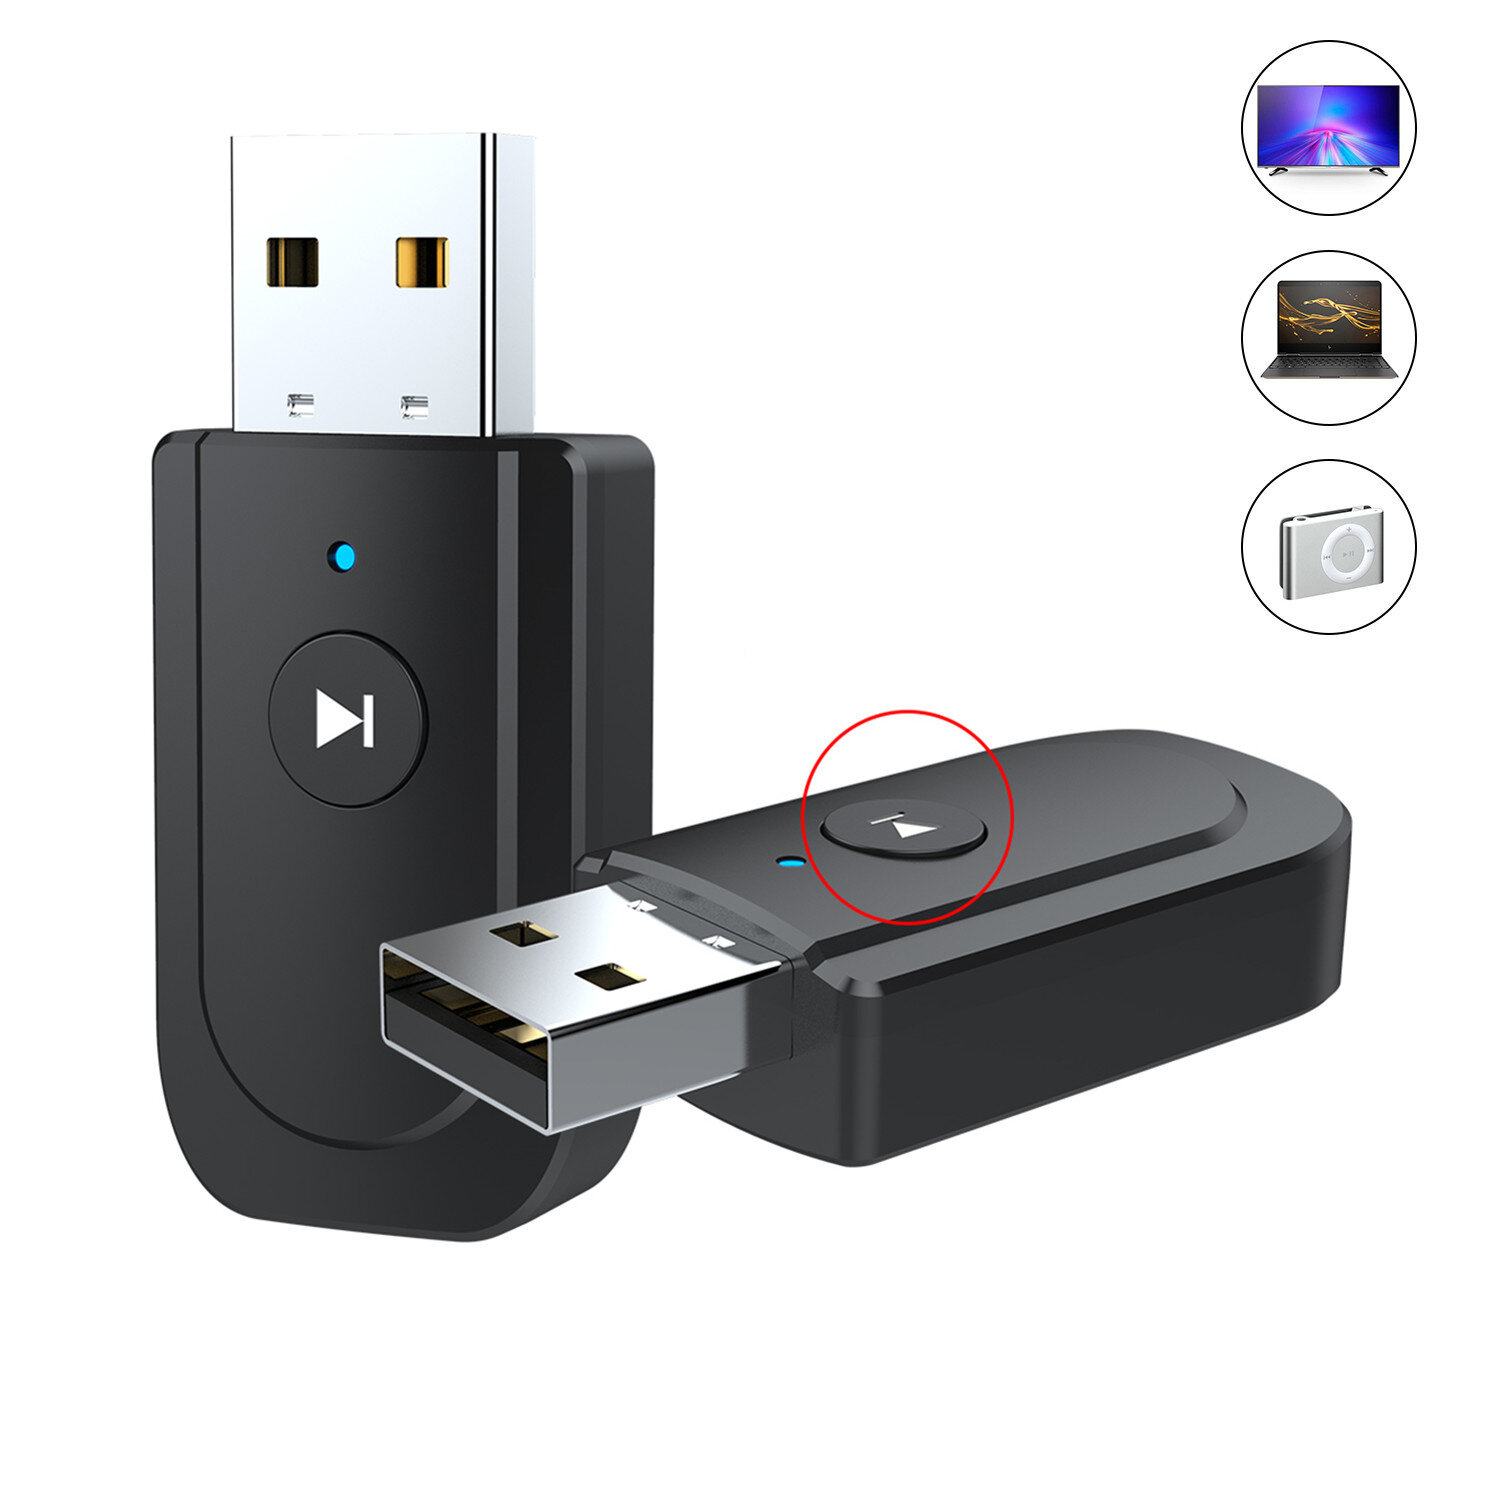 

ENKAY SY318 bluetooth 5.0 Audio Receiver Transmitter Adapter 3.5mm Jack AUX USB Stereo Music Wireless Adapter for TV Car